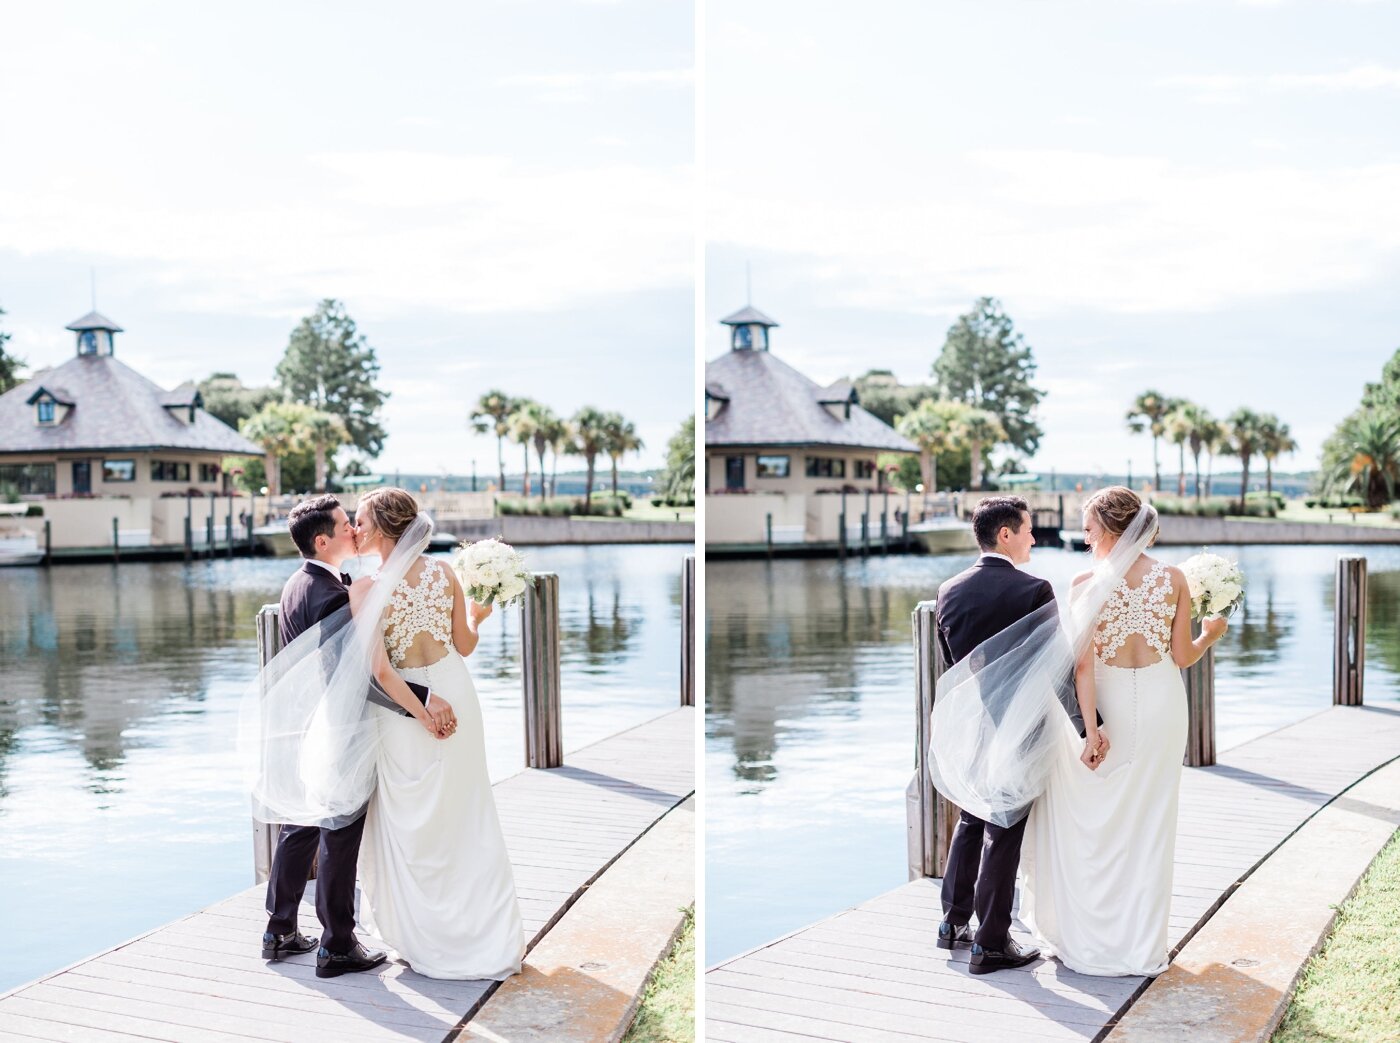 Theresa + Chris’s classic wedding at Wexford Plantation in Hilton Head